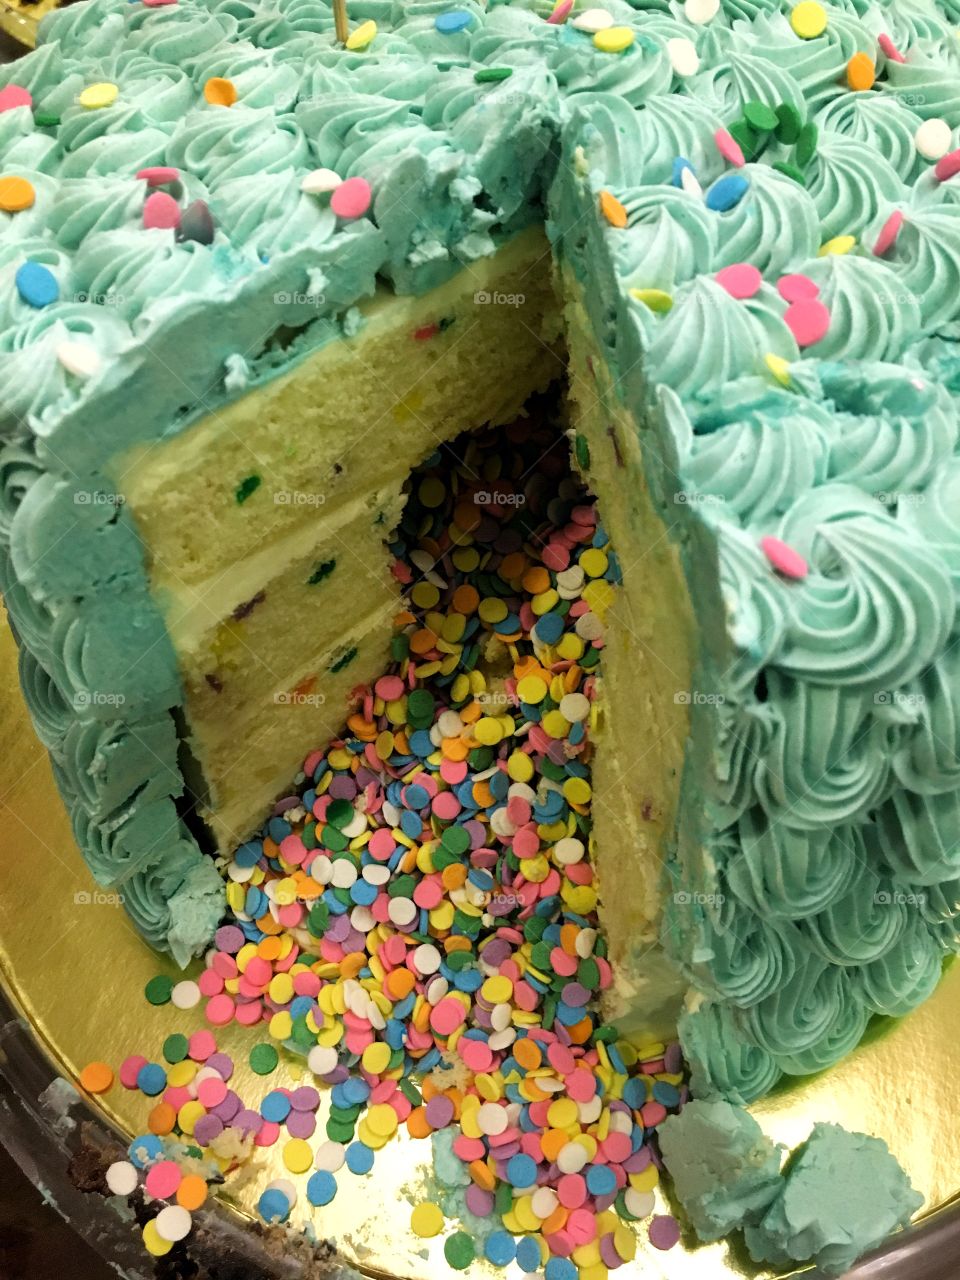 A colorful surprise in a cake